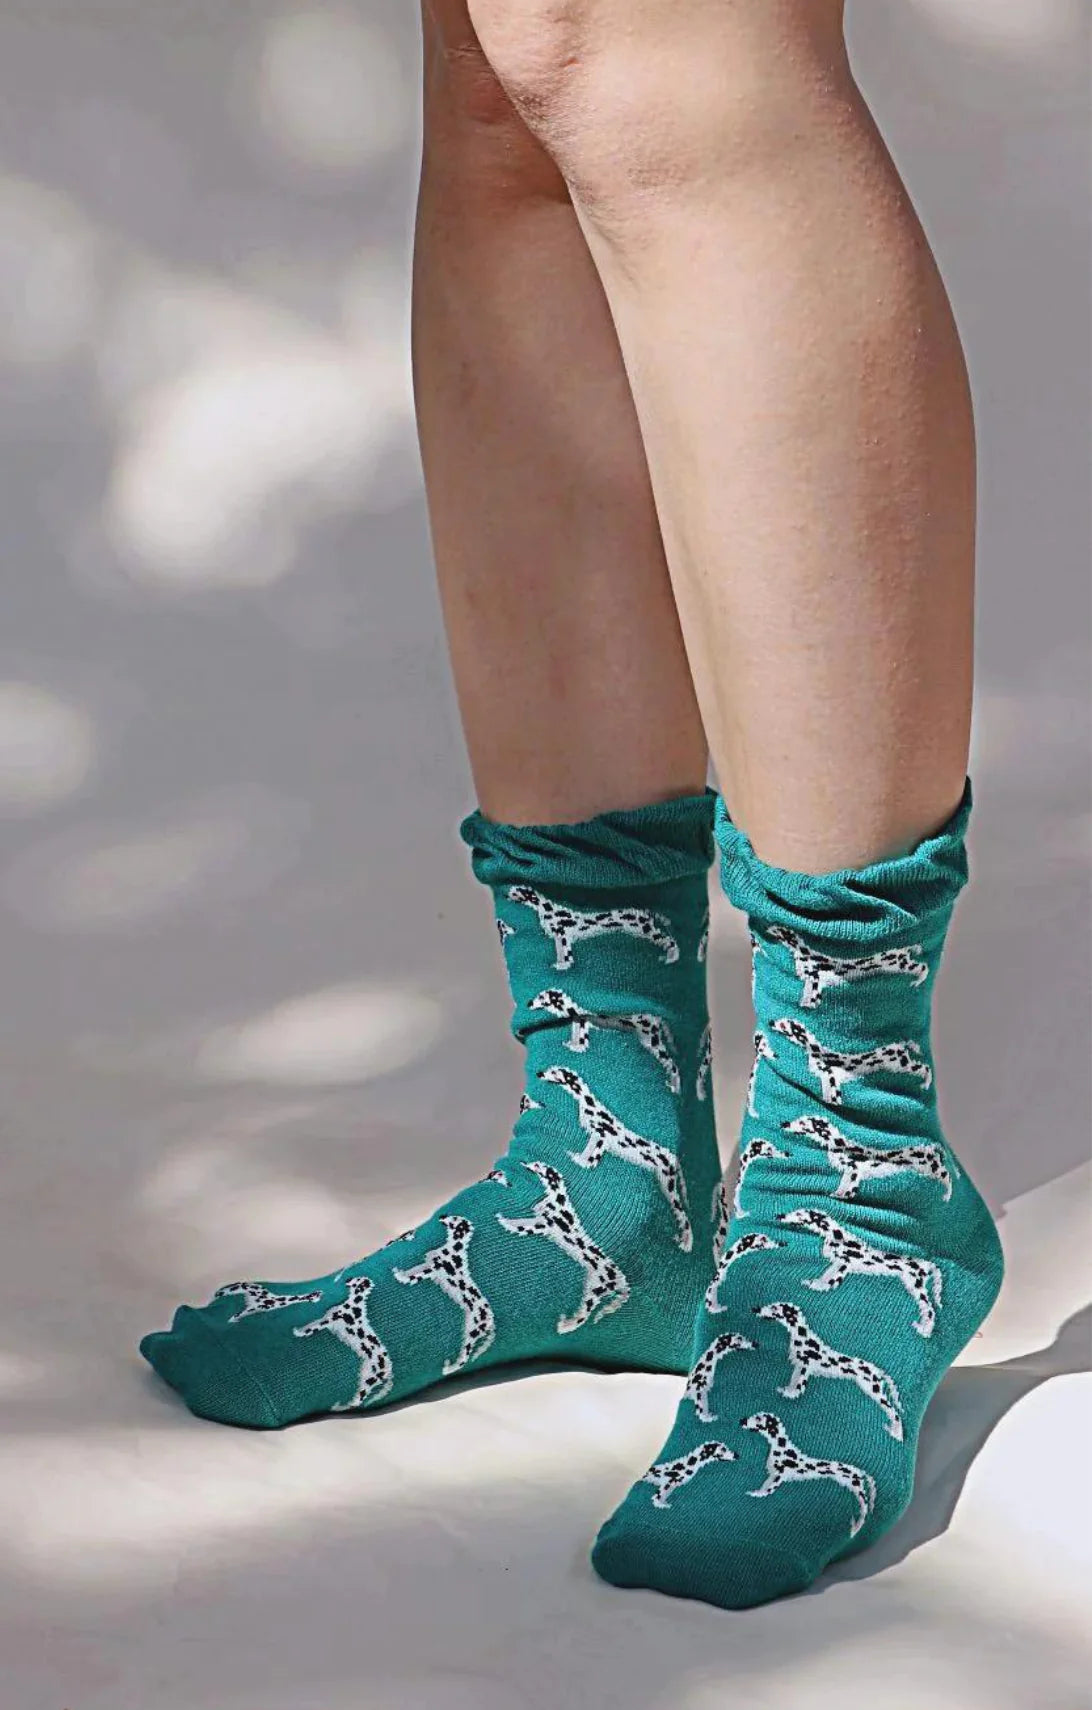 Tabbisocks brand's Animal Rescue Pairs DALMATIAN Socks, a pair of socks with emerald green fabric and a Dalmatian illustration scattered throughout, seen from a 45-degree angle on a woman's leg